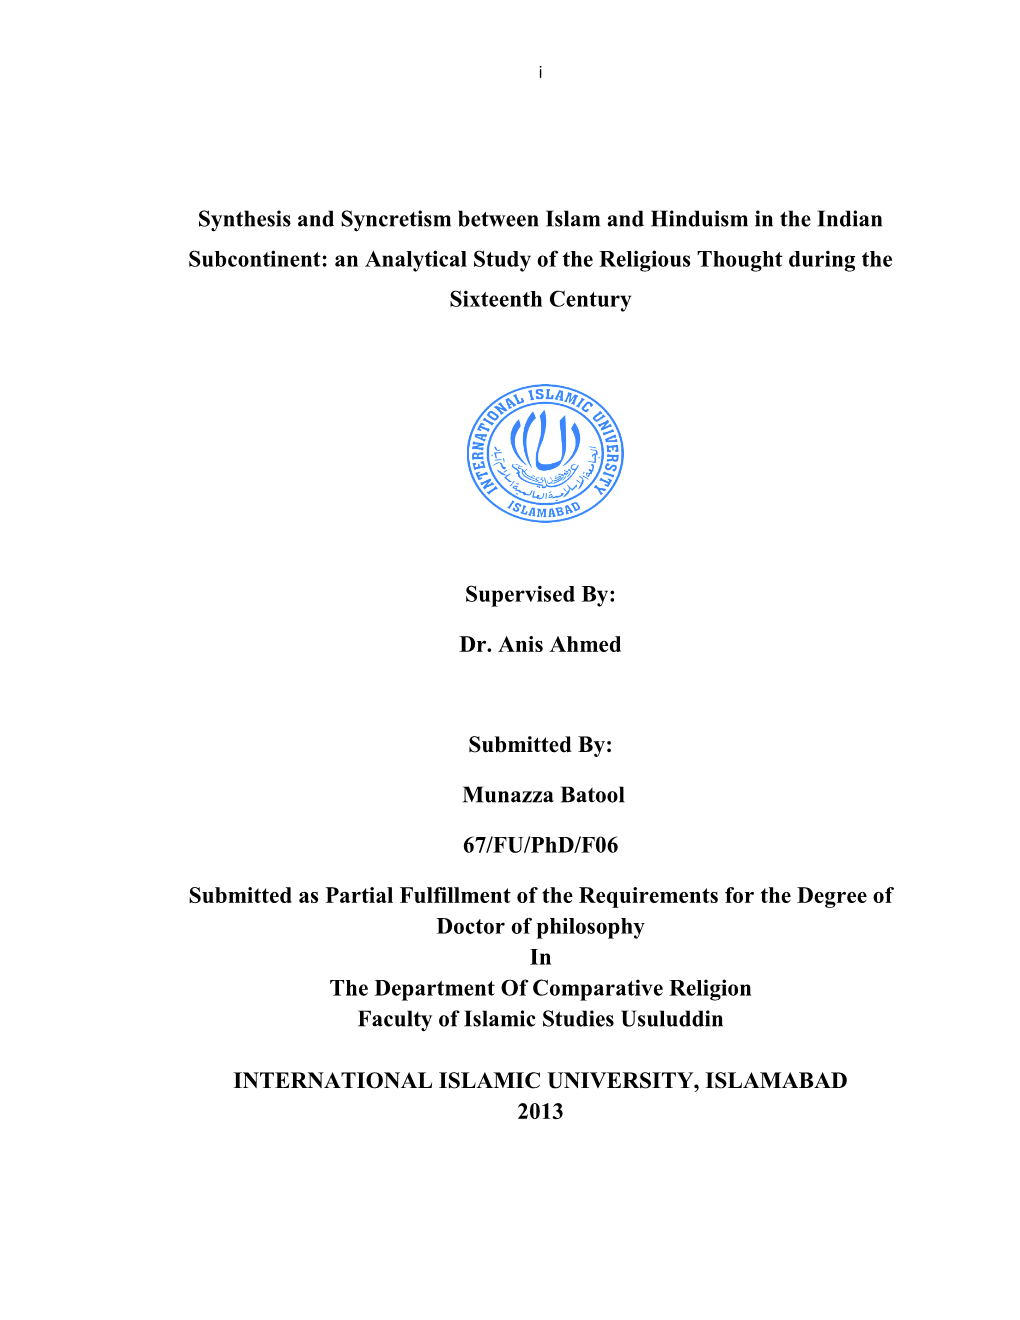 Synthesis and Syncretism Between Islam and Hinduism in the Indian Subcontinent: an Analytical Study of the Religious Thought During the Sixteenth Century